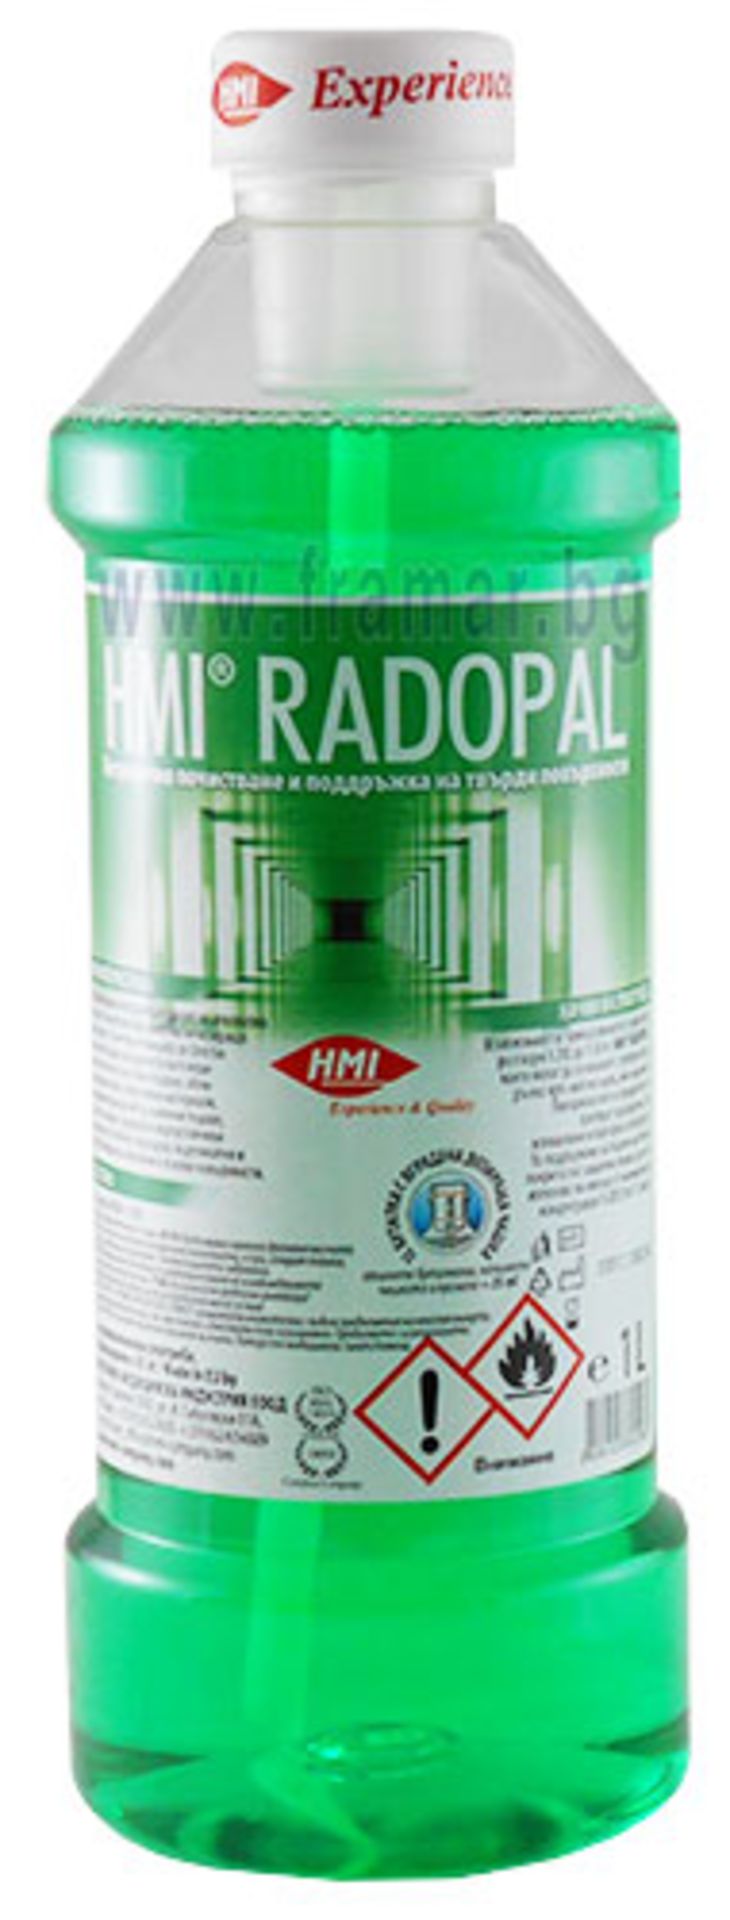 20 x HMI Radopal Disinfectant For Cleaning of Hard Surfaces 1L - Image 3 of 3